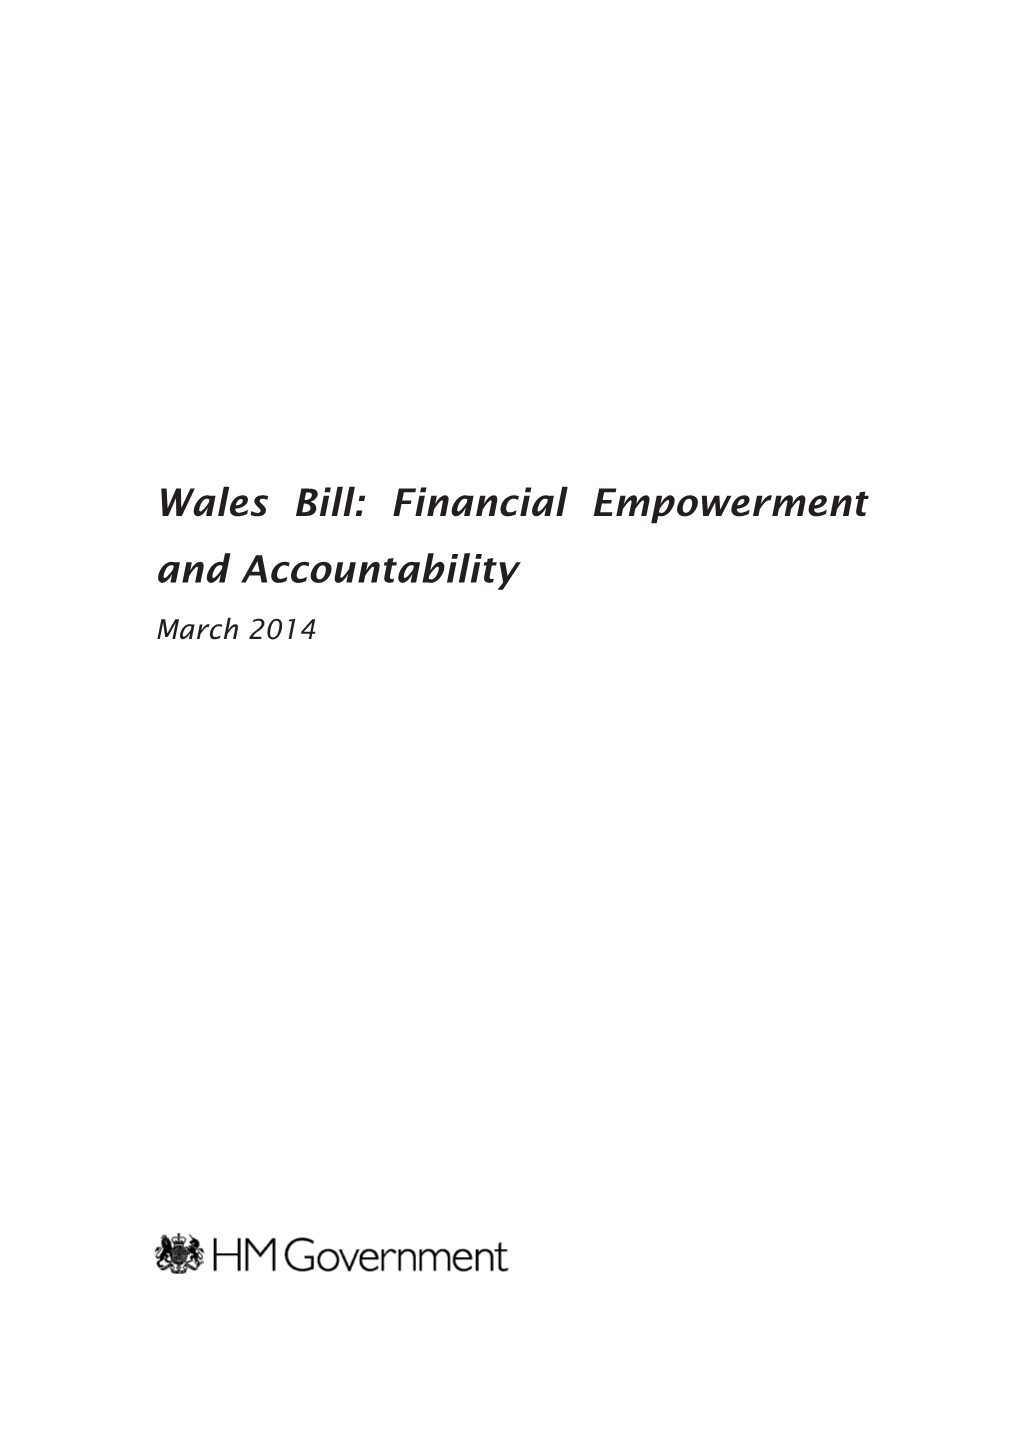 Wales Bill: Financial Empowerment and Accountability March 2014